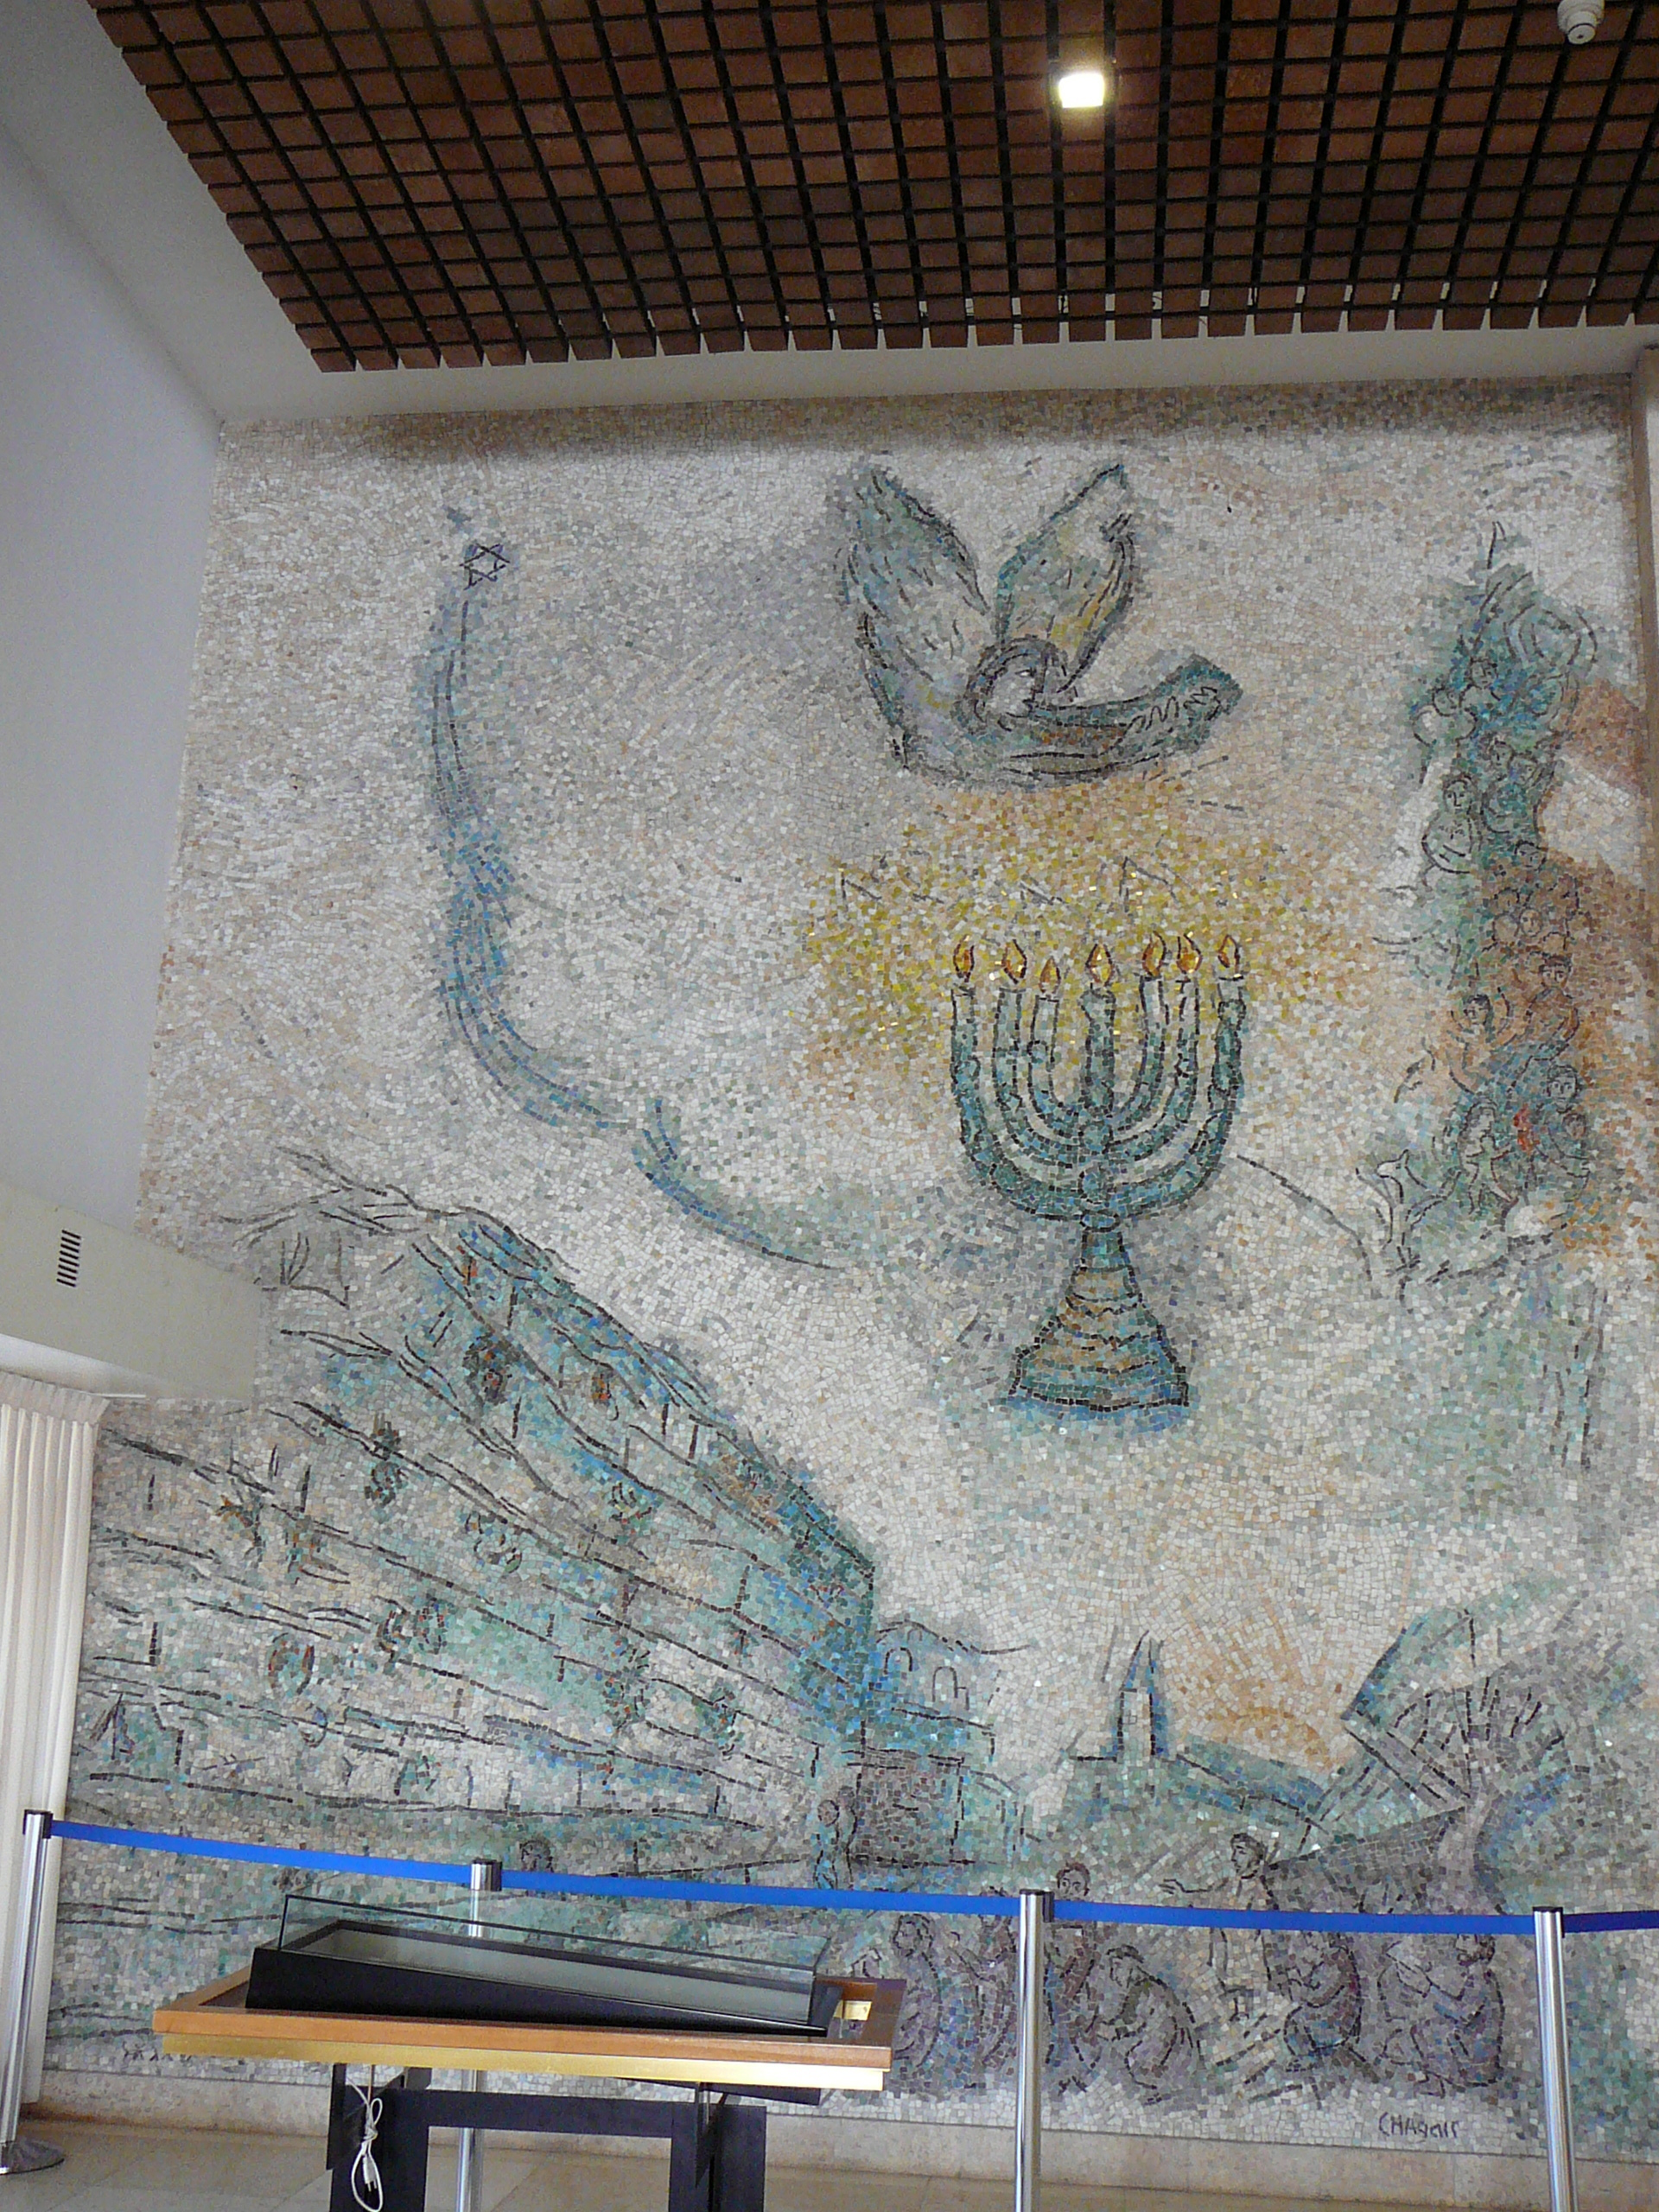 Chagall's interpretation of the Wailing Wall as a great mosaic performed by Italian artists. In the middle appears the angel of salvation, which calls the Jewish people home from the diaspora